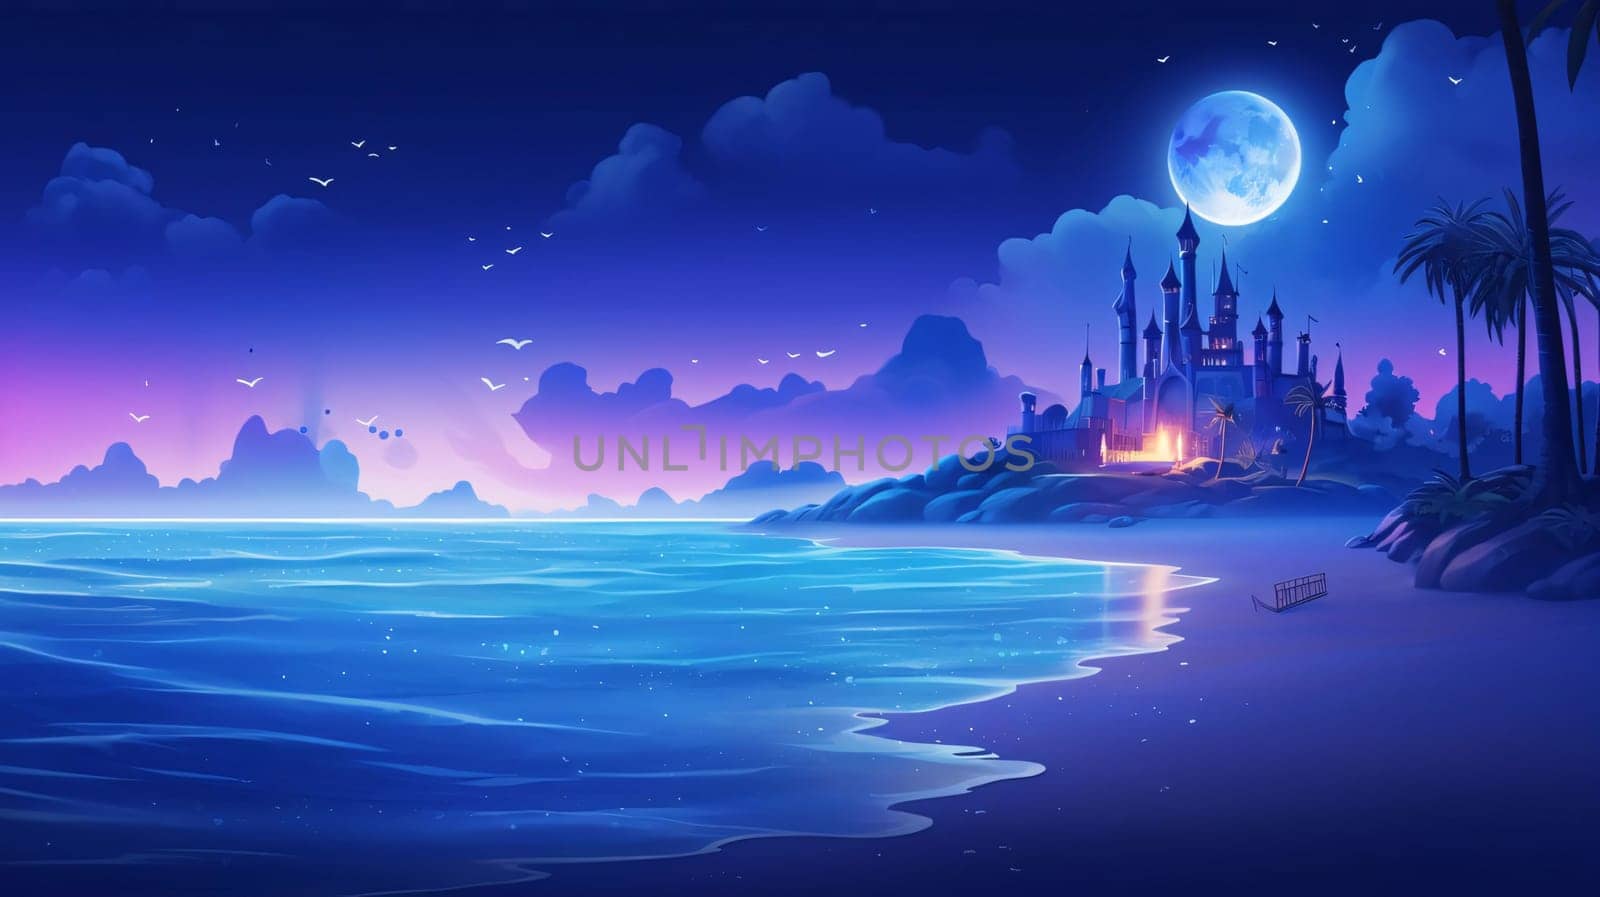 Banner: Illustration of a mosque in the middle of the ocean at night